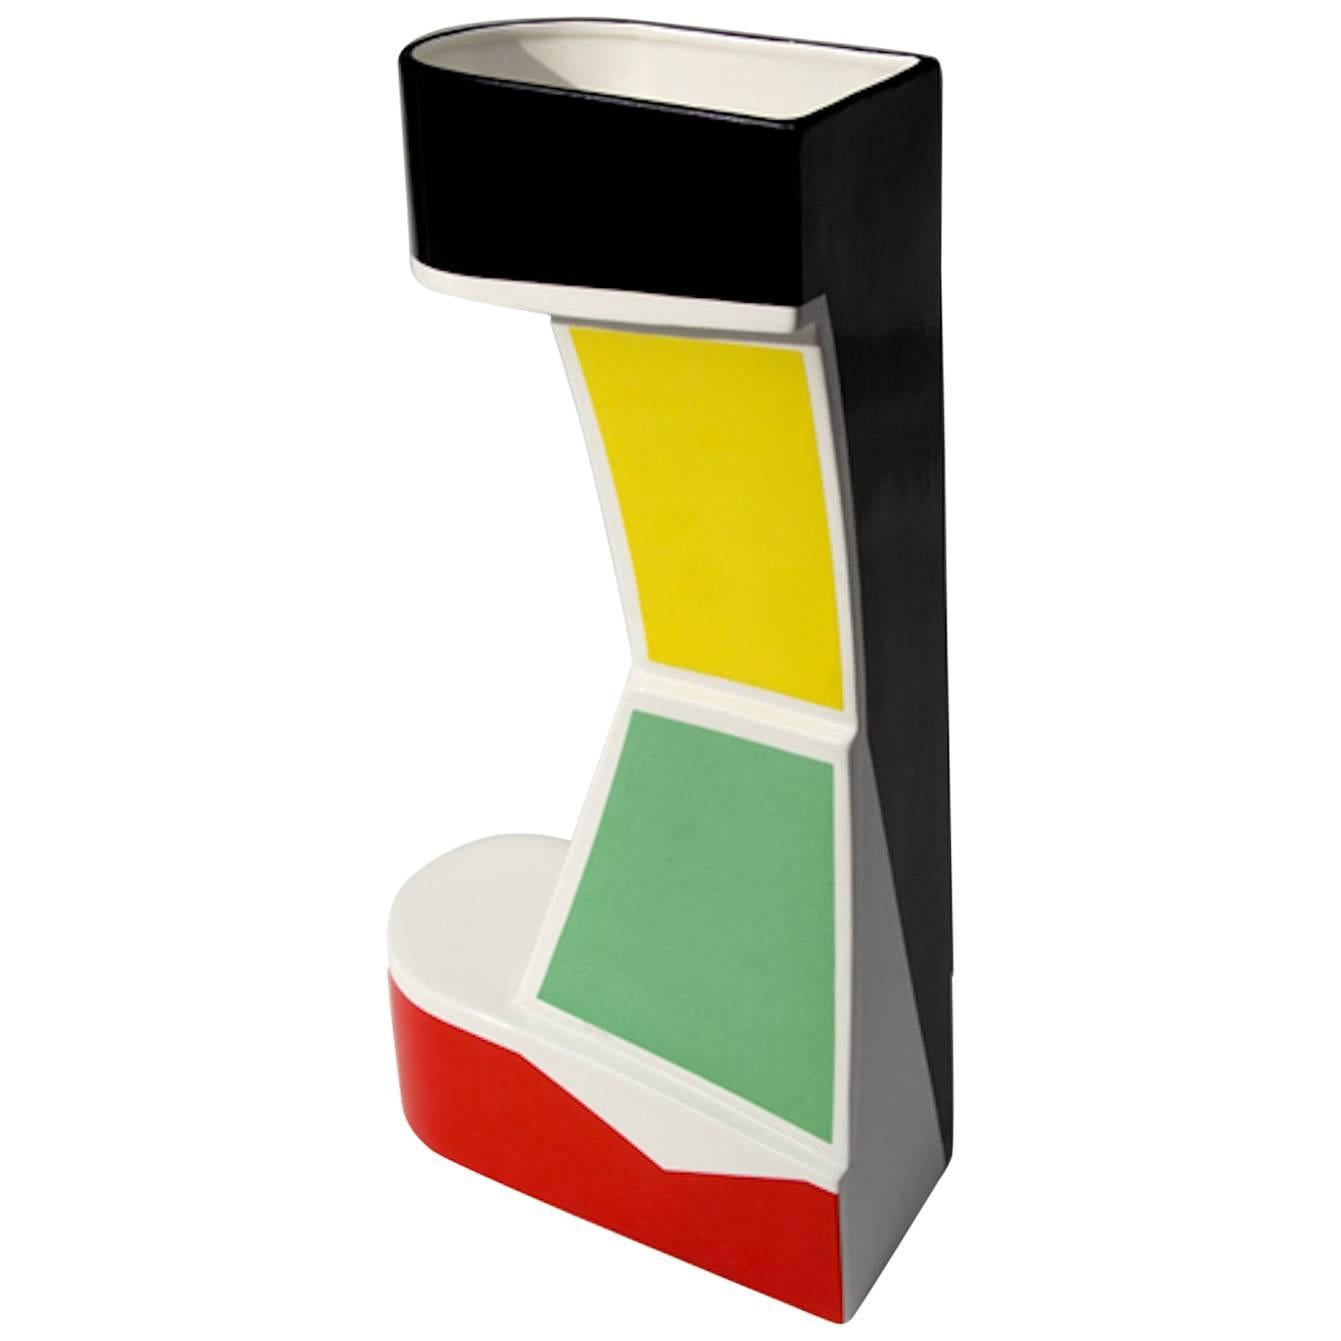 Italian Ceramic Vase Black Model by George Sowden for Superego Editions. For Sale